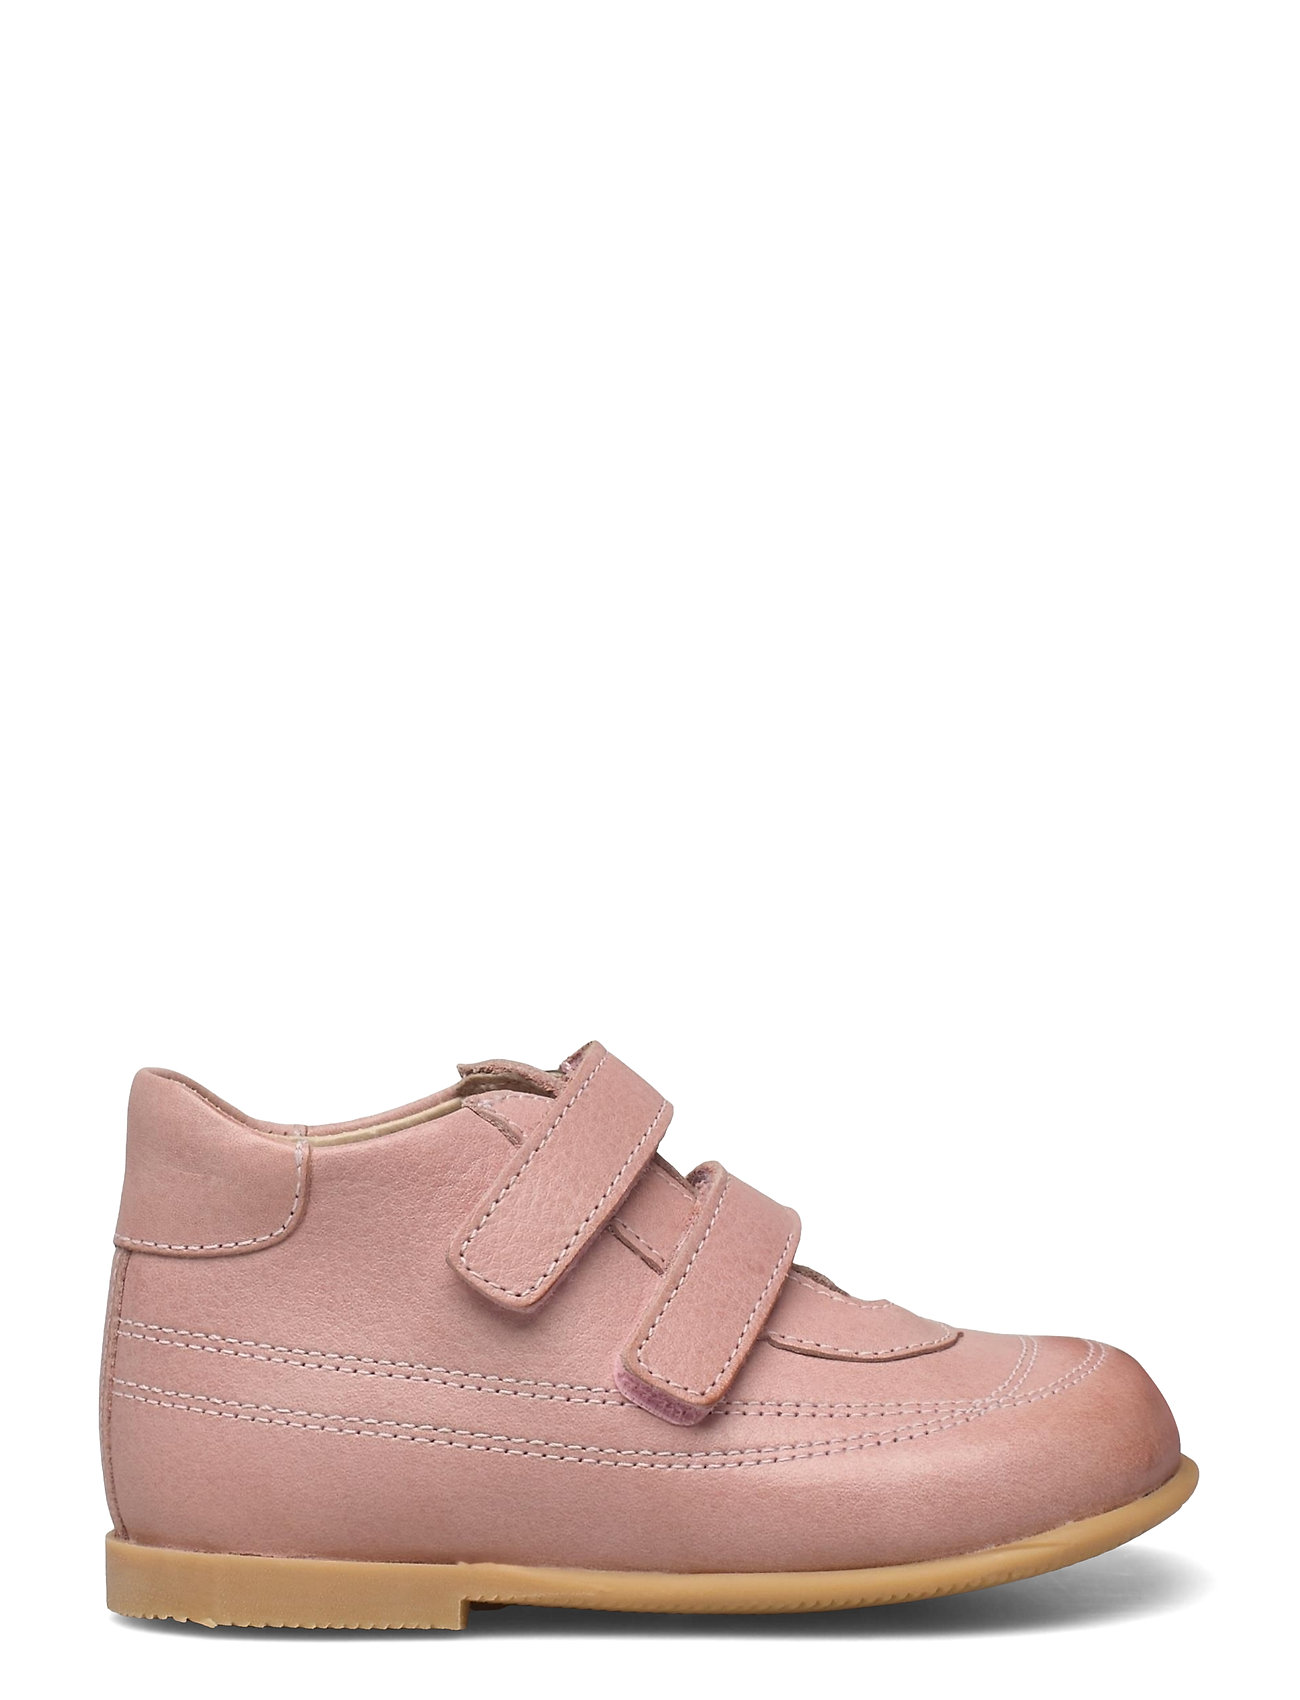 Hand Made Low Boot Shoes Pre-walkers - Beginner Shoes  Pink Arauto RAP